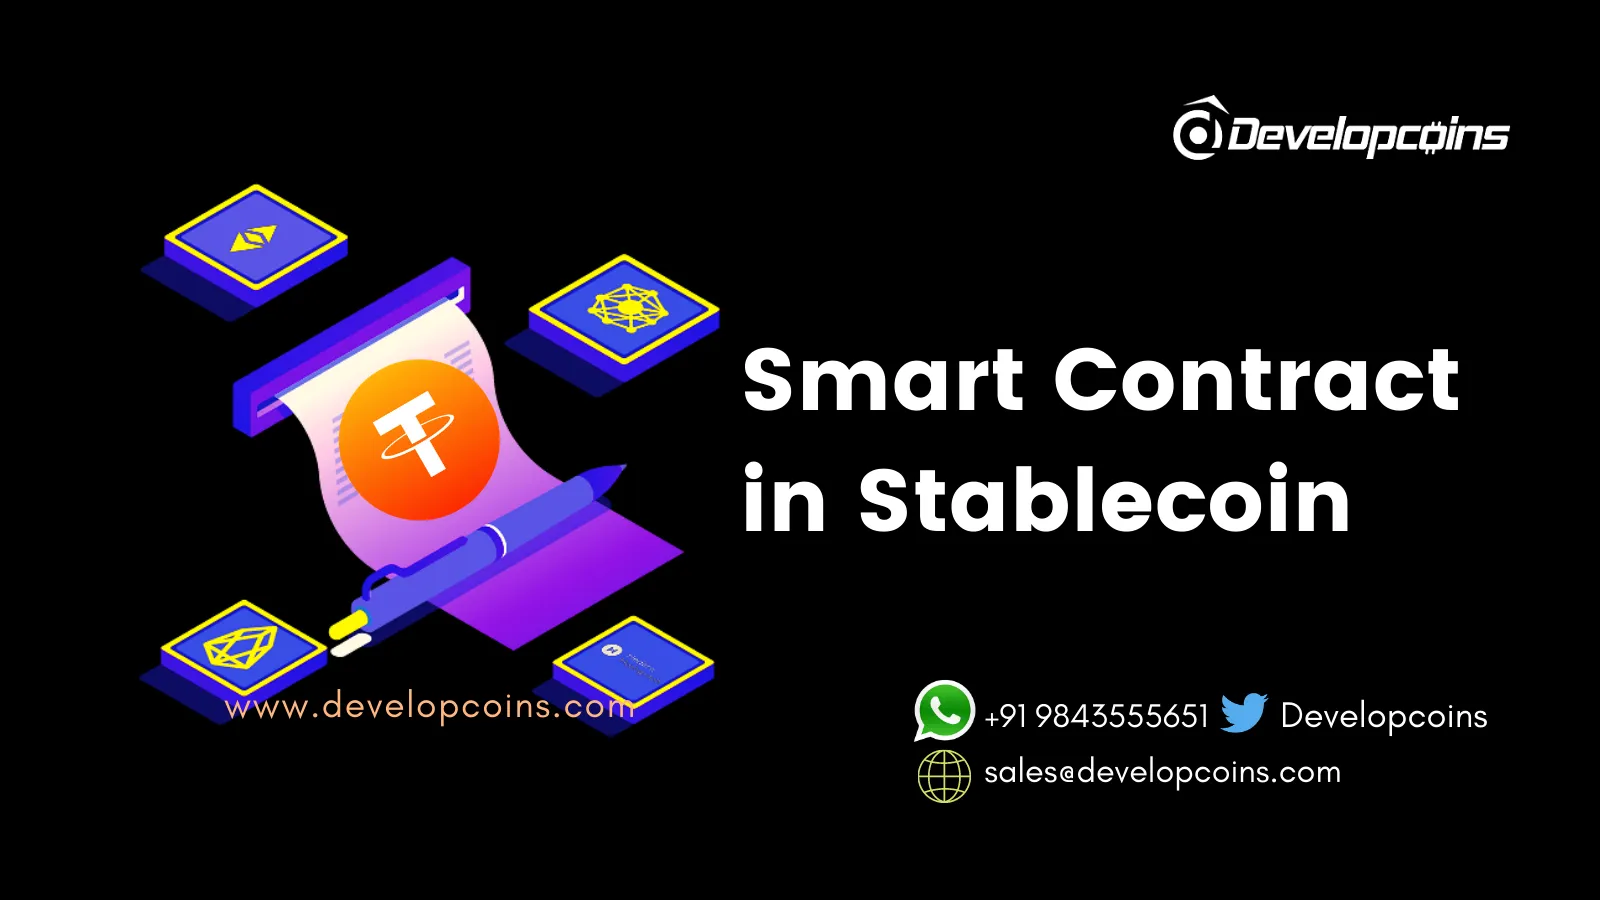 Smart Contract in Stablecoin